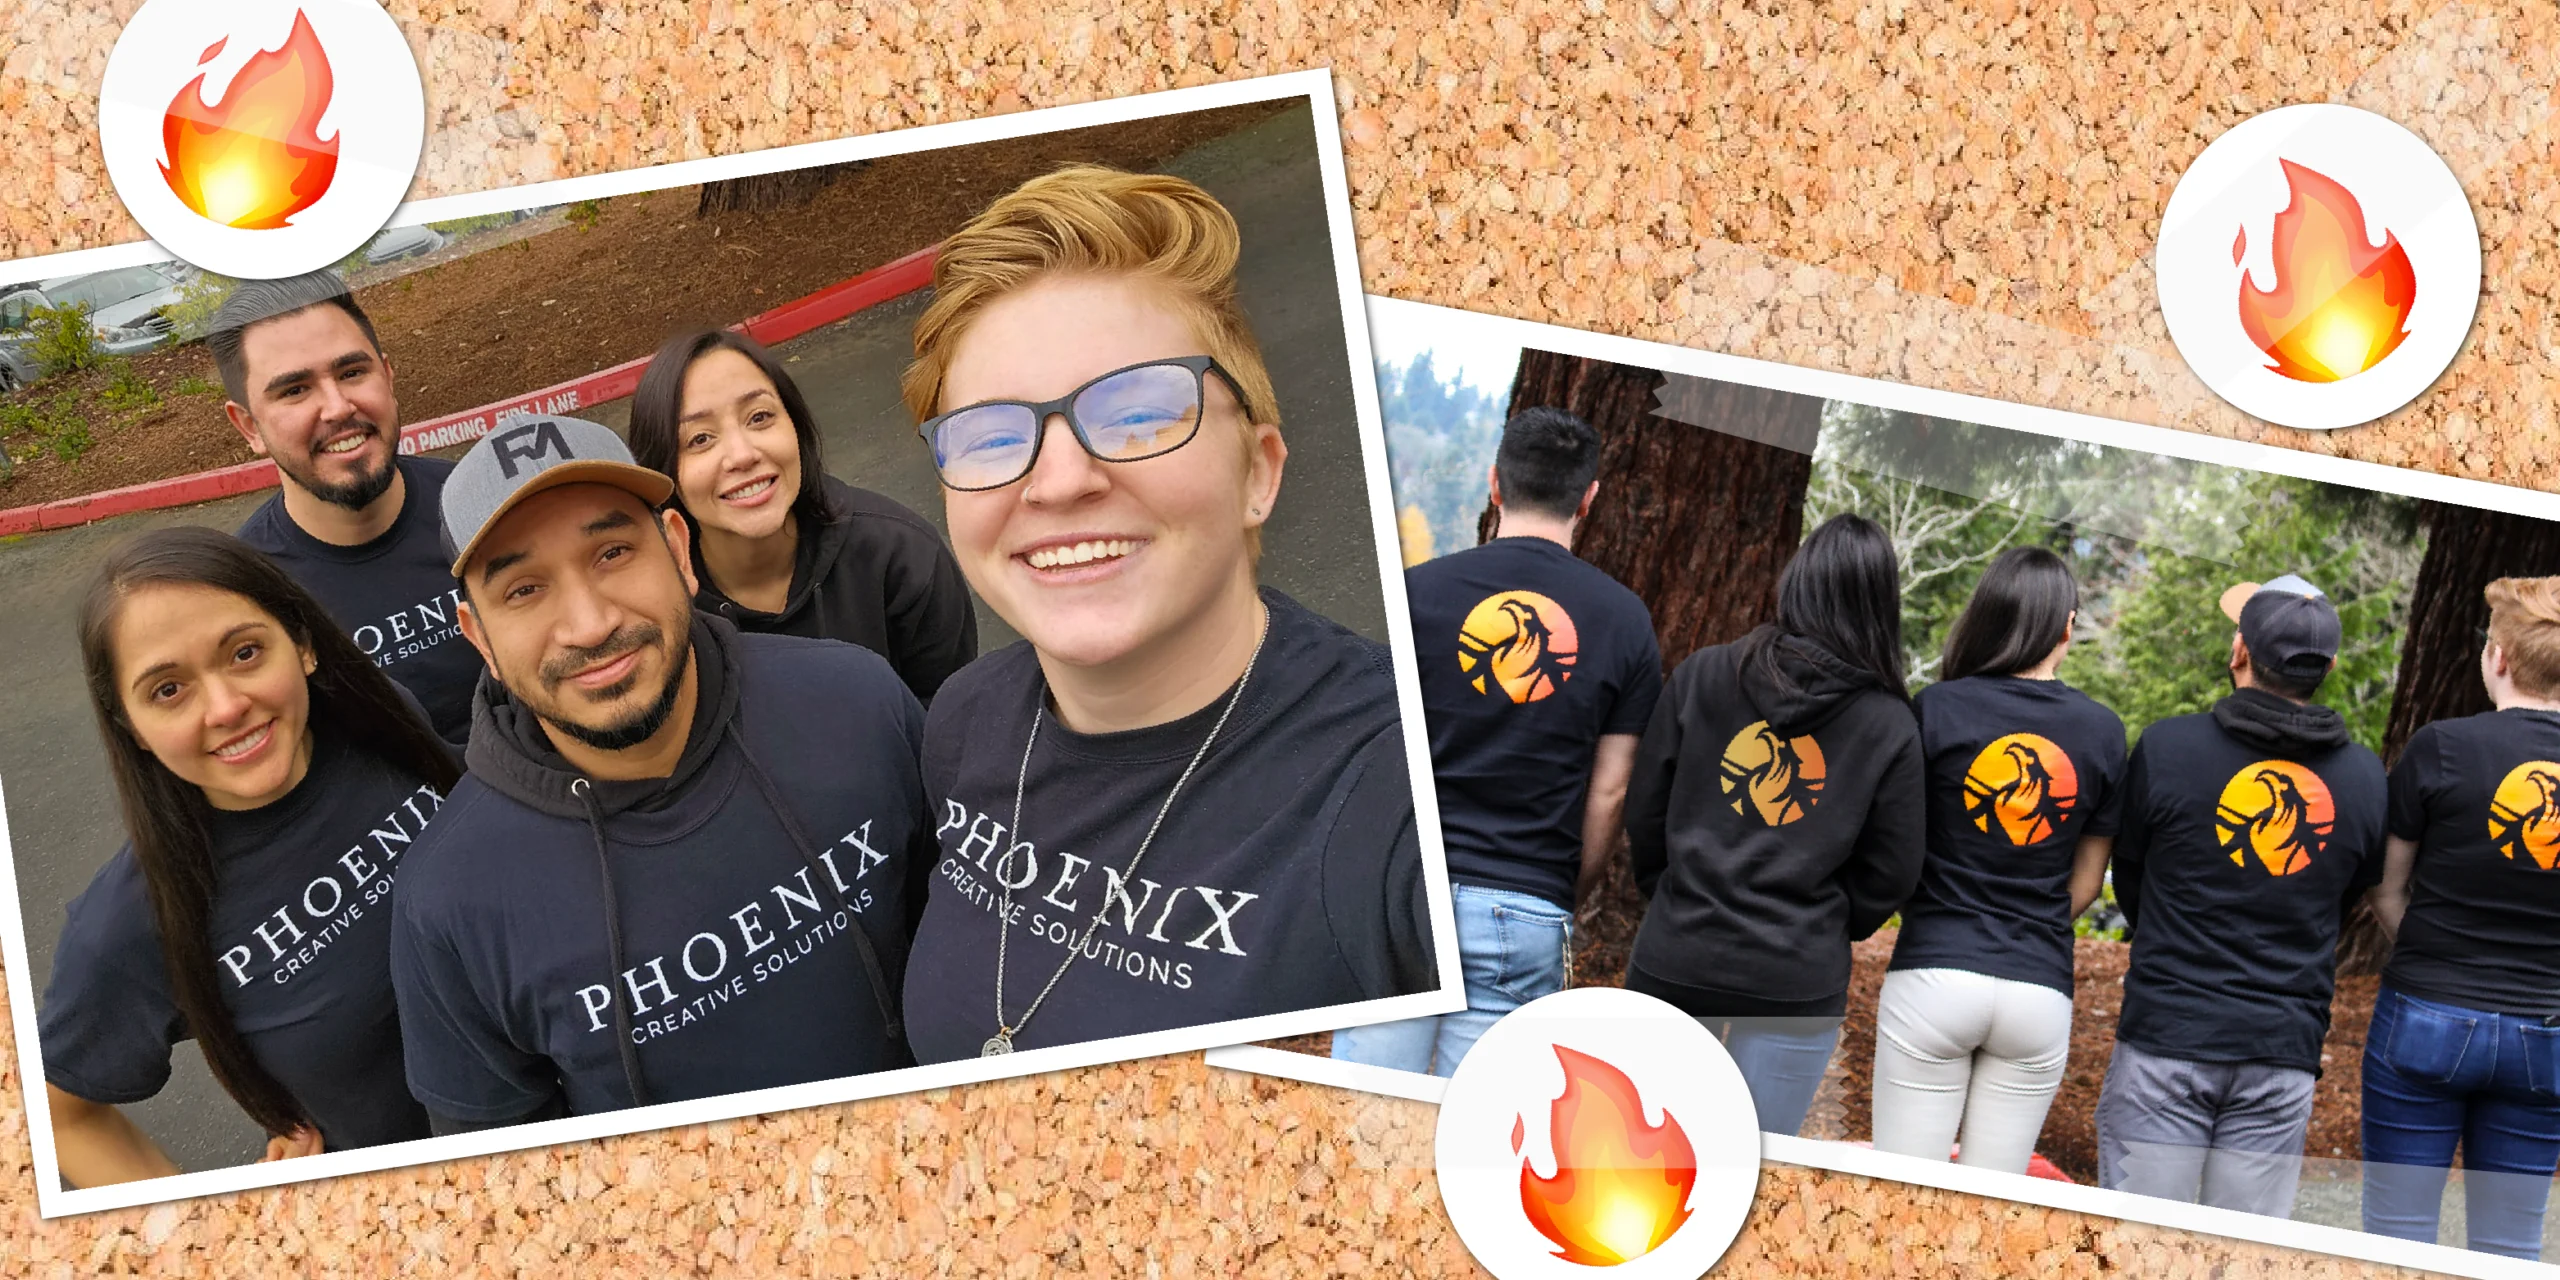 Thumbnail image for post Phoenix – Who We Are, What We Do, and Where We’ll Go Together